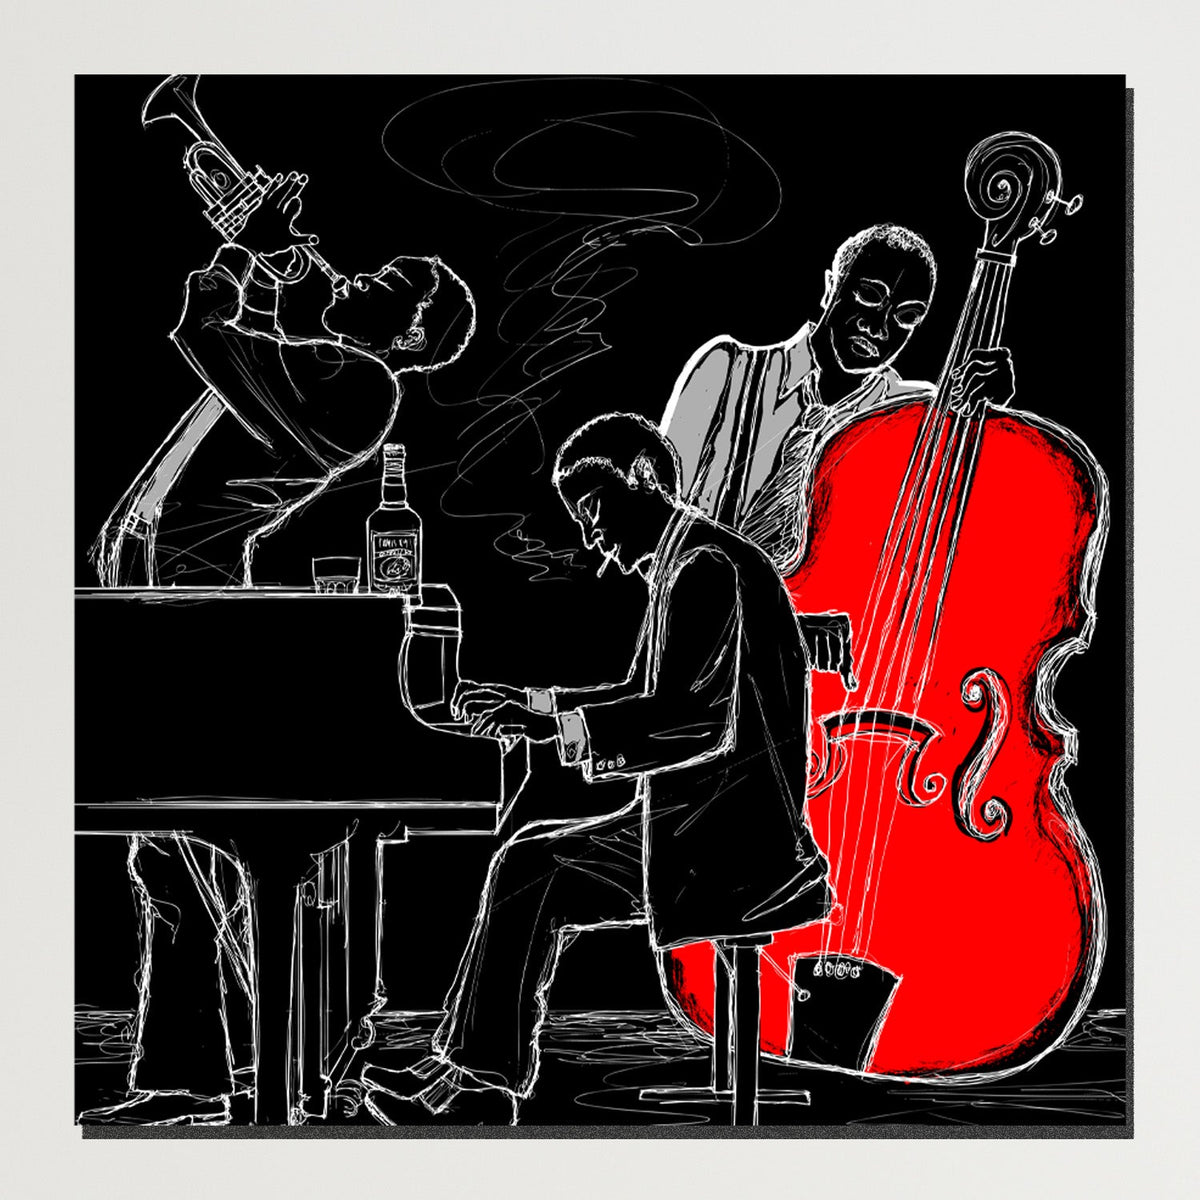 https://cdn.shopify.com/s/files/1/0387/9986/8044/products/JazzMusicBandCanvasArtprintStretched-Plain.jpg